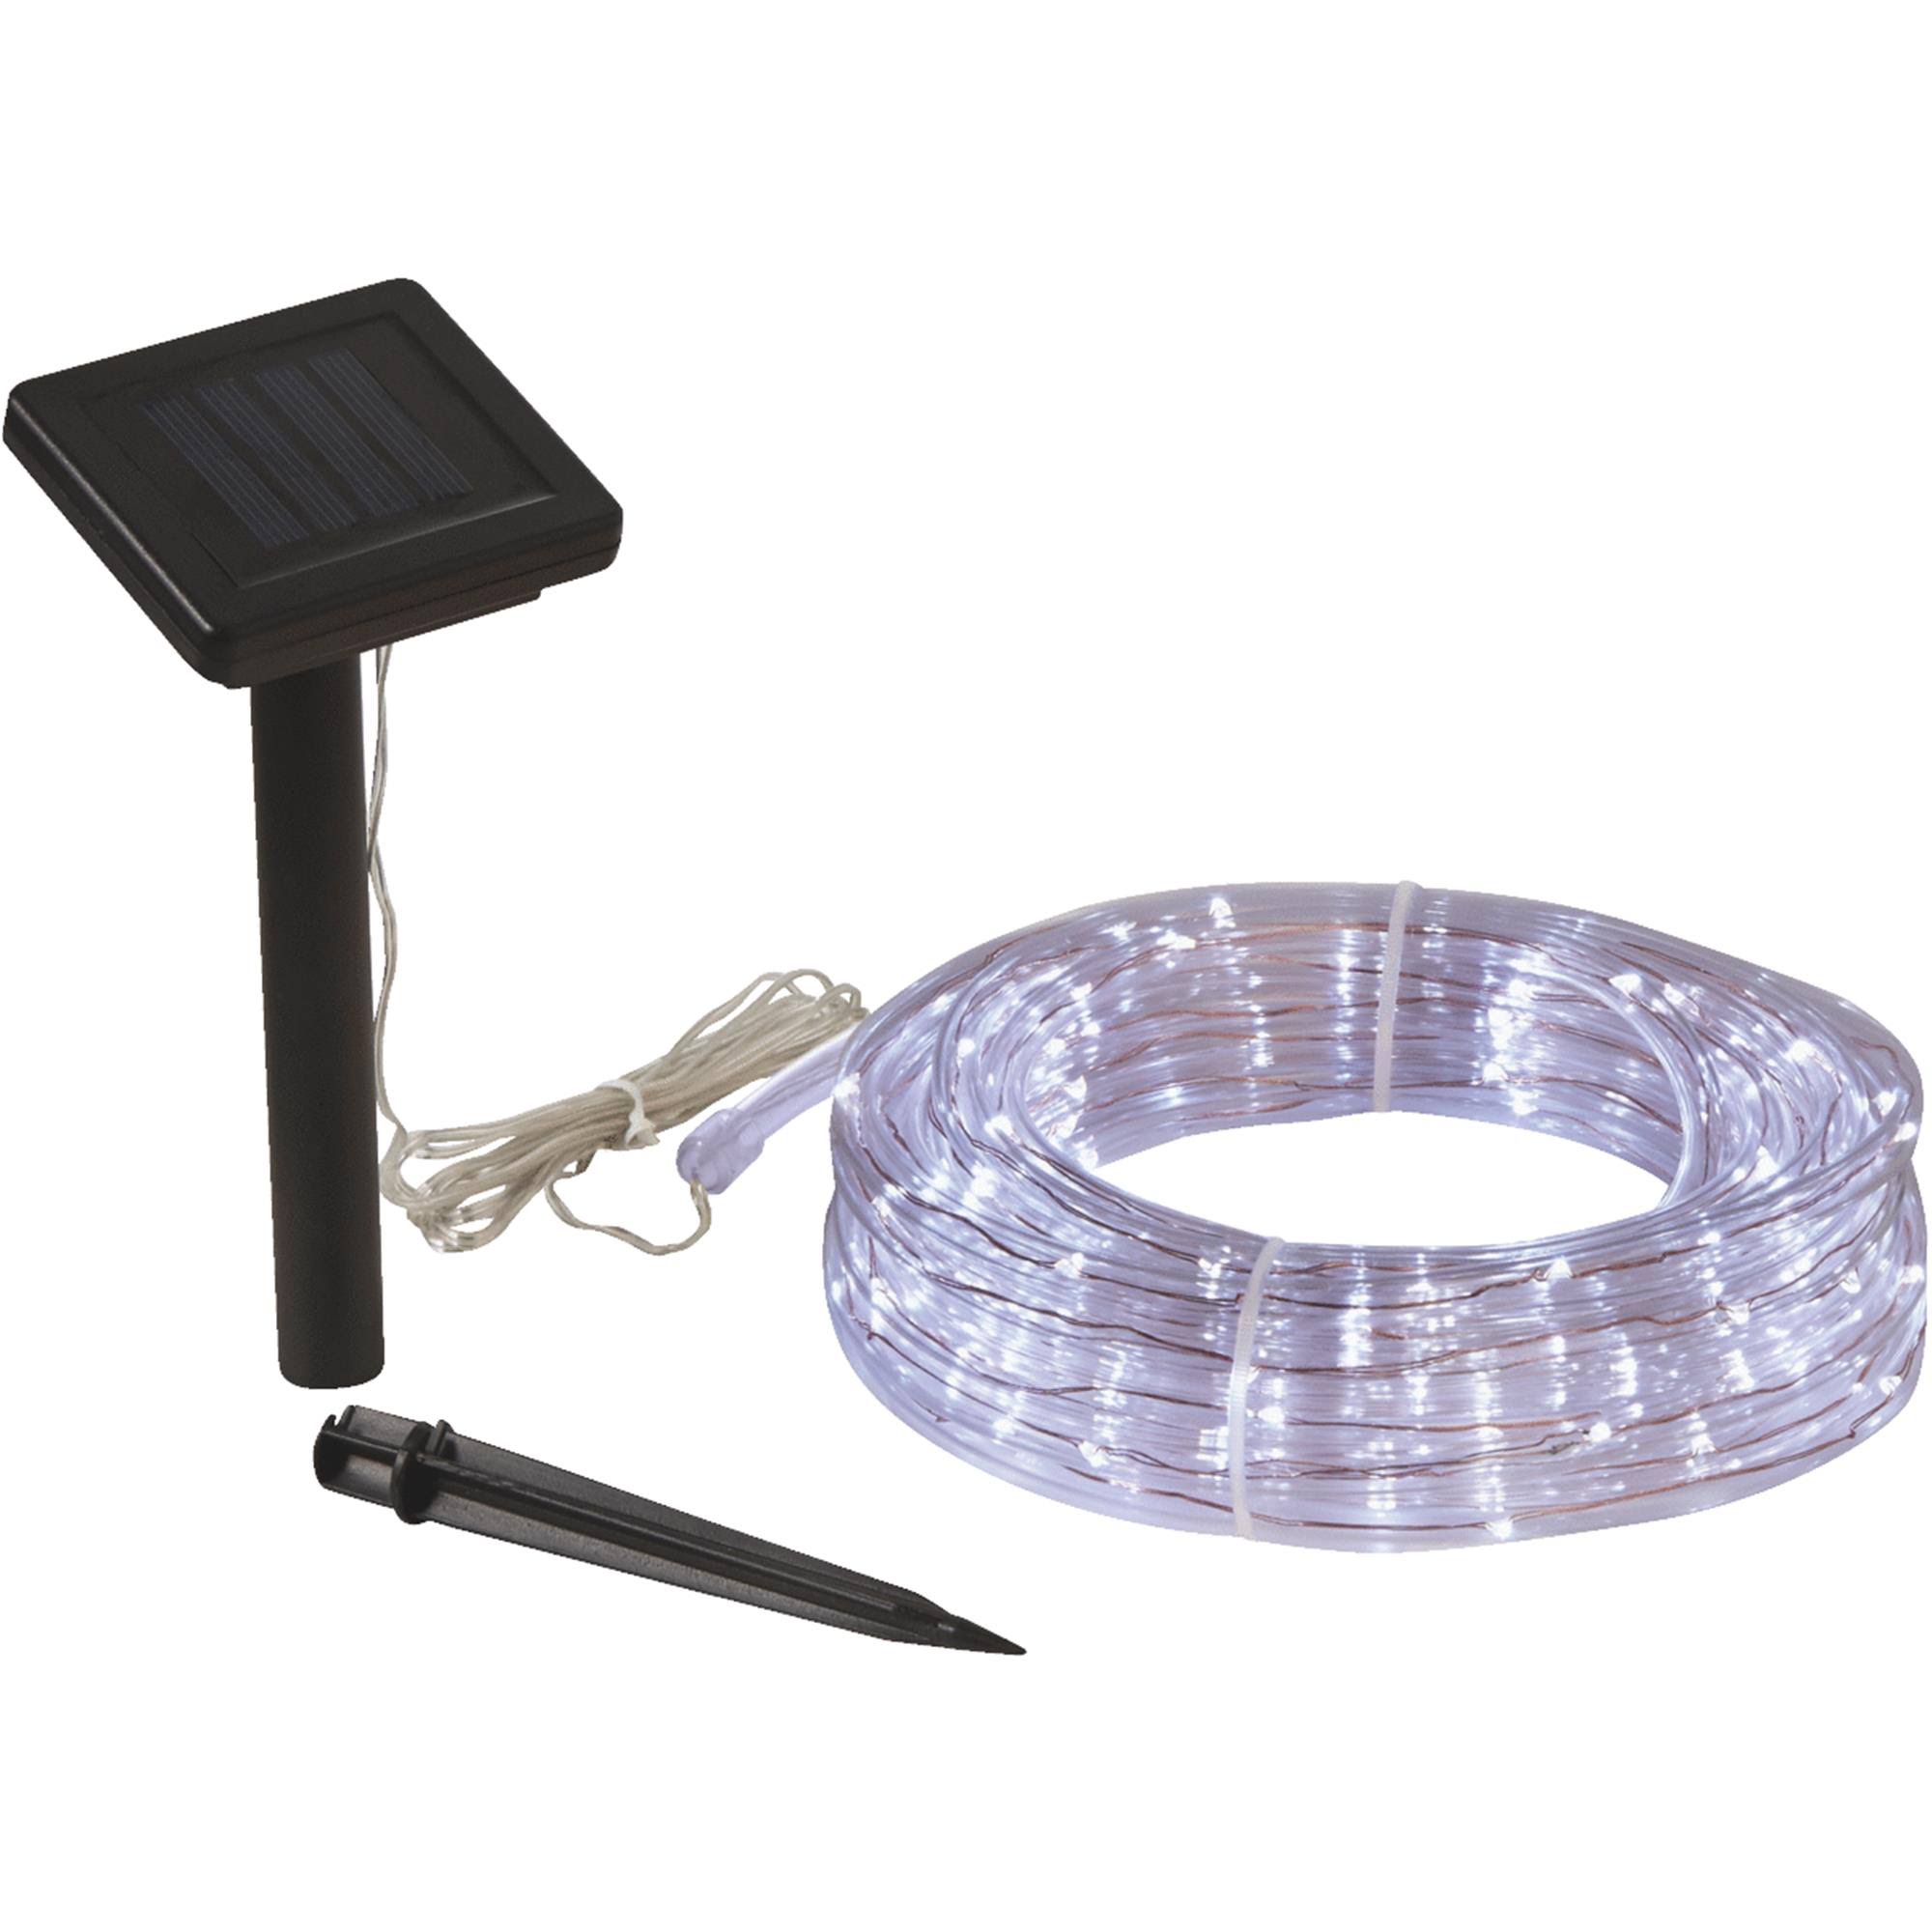 Outdoor Expressions Solar CW Rope Light B-22CW